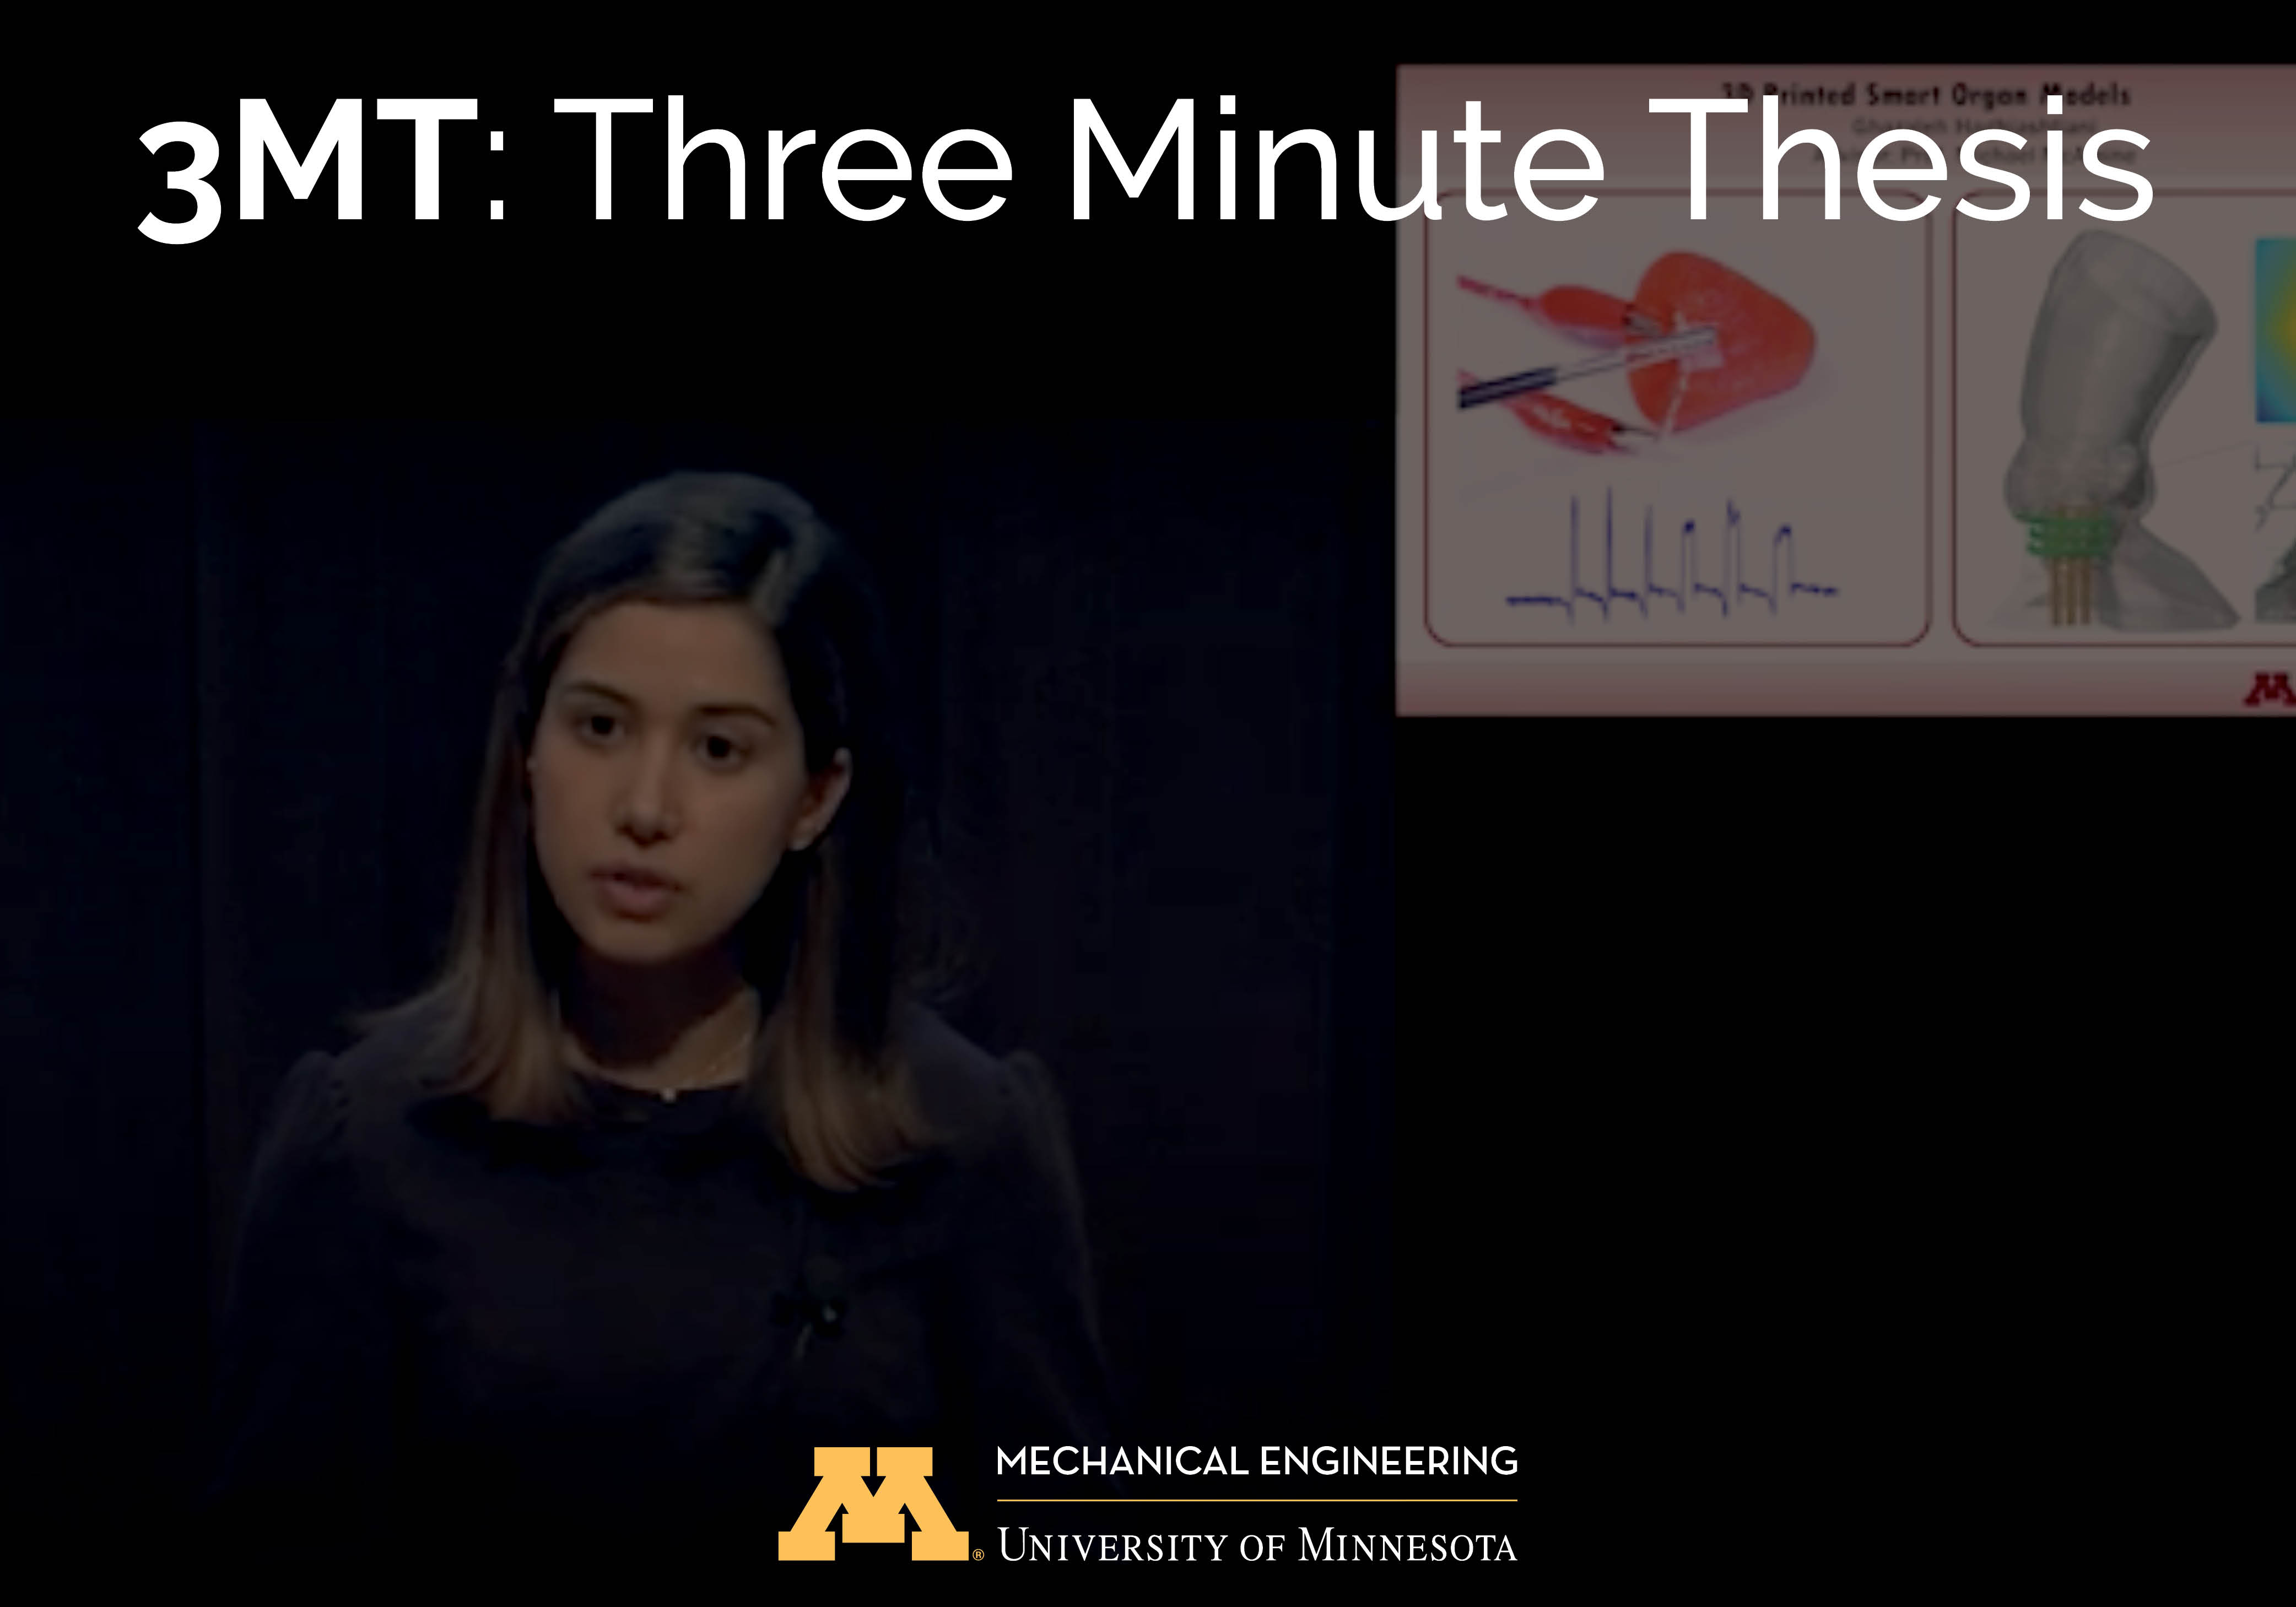 Three Minute Thesis event image